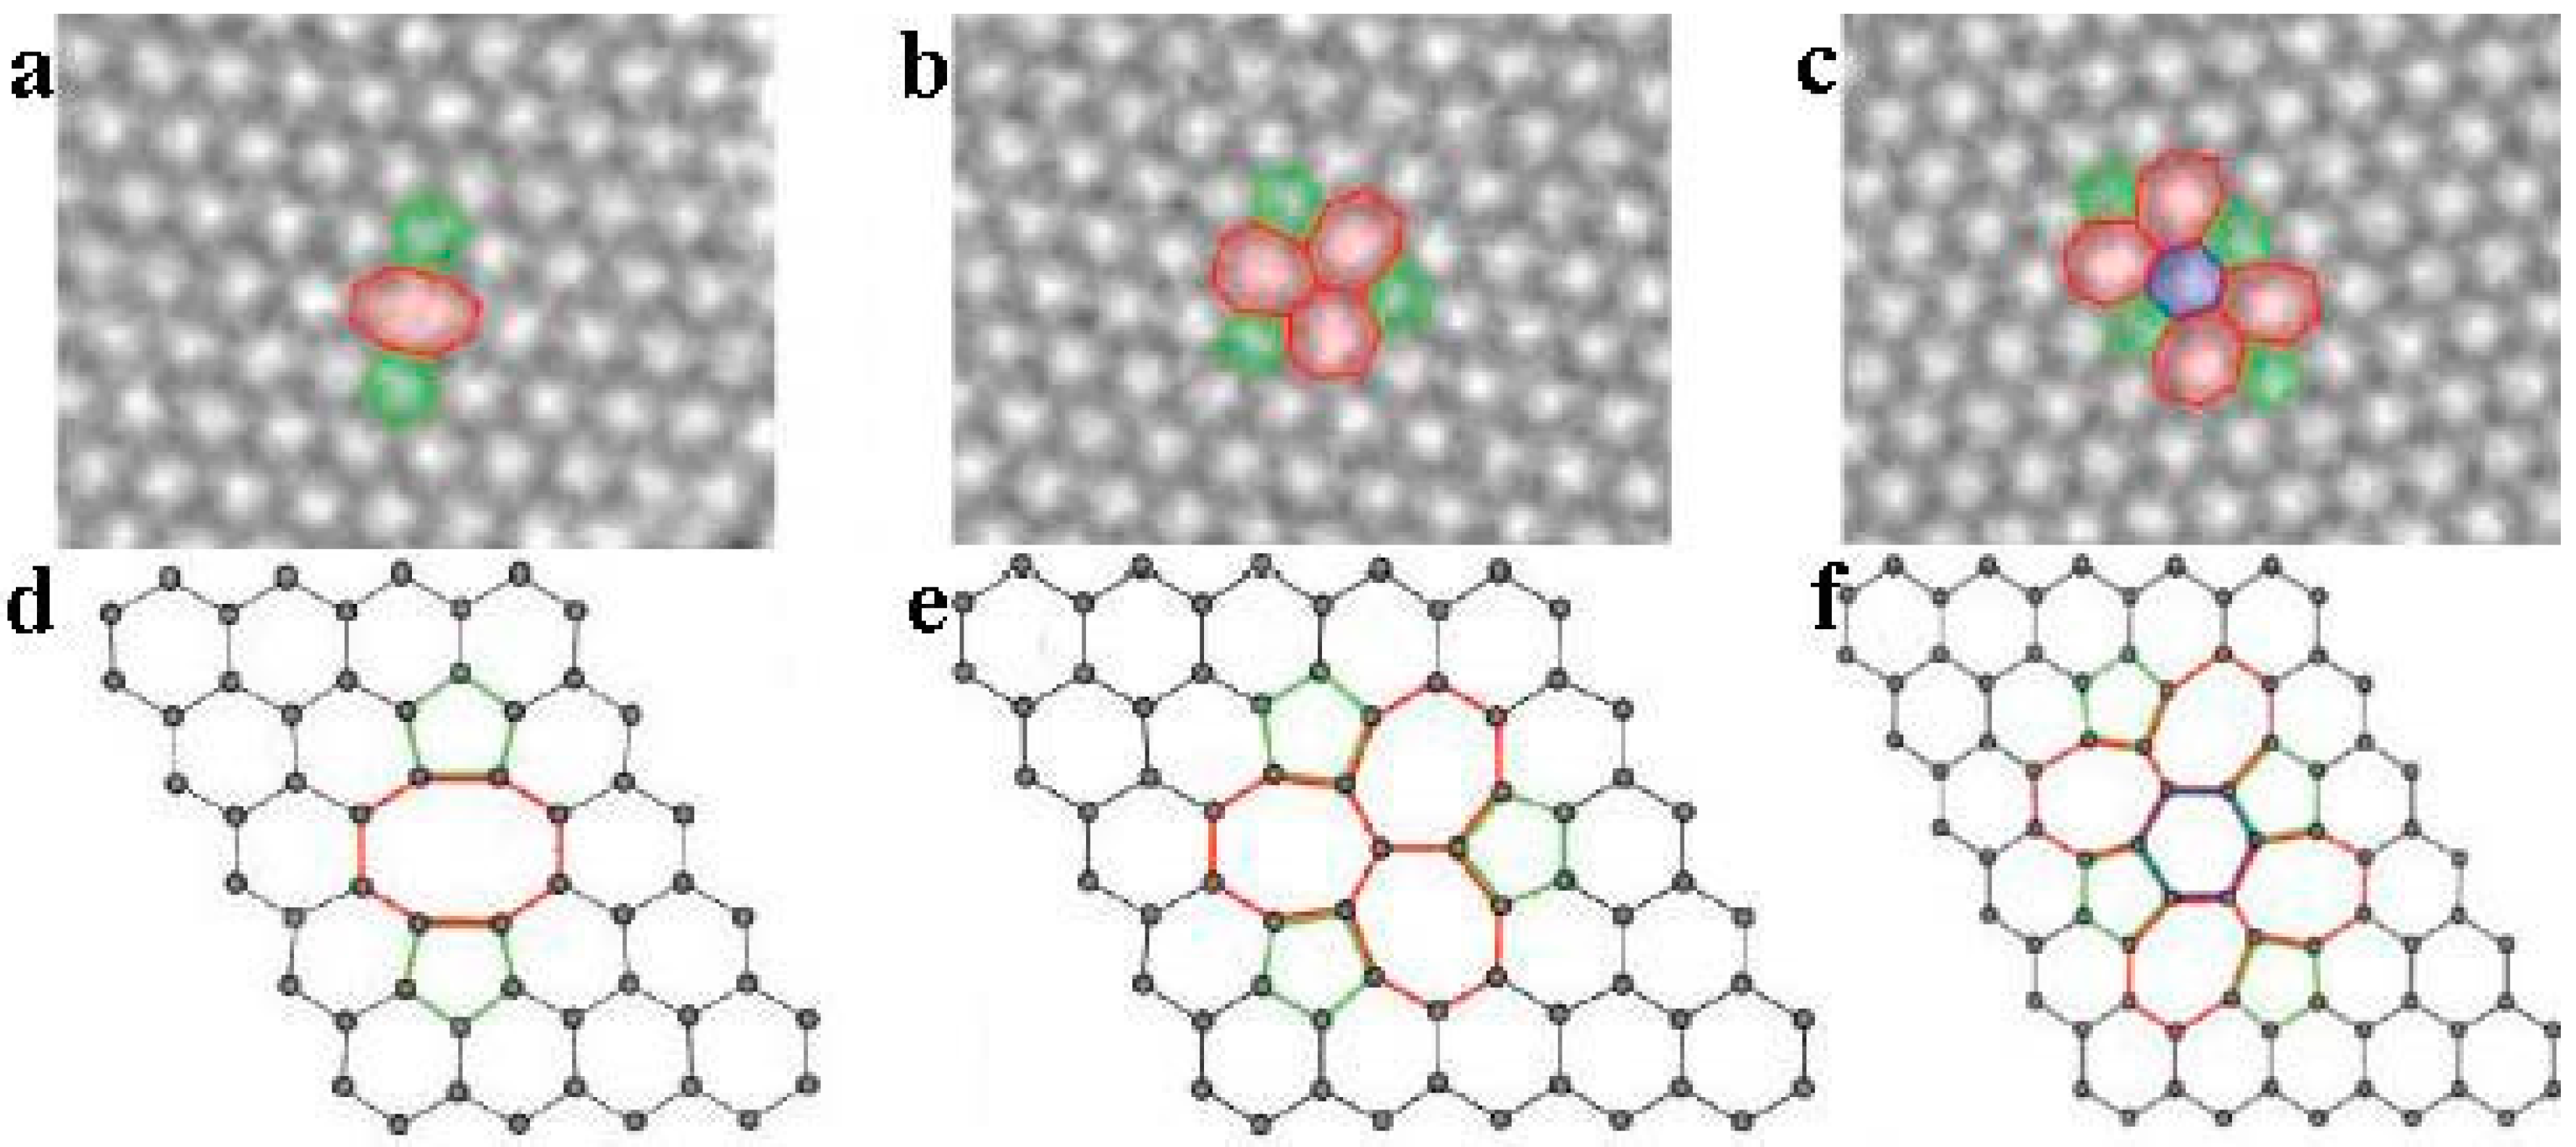 Micromachines | Free Full-Text | A Review on Lattice Defects in Graphene:  Types, Generation, Effects and Regulation | HTML